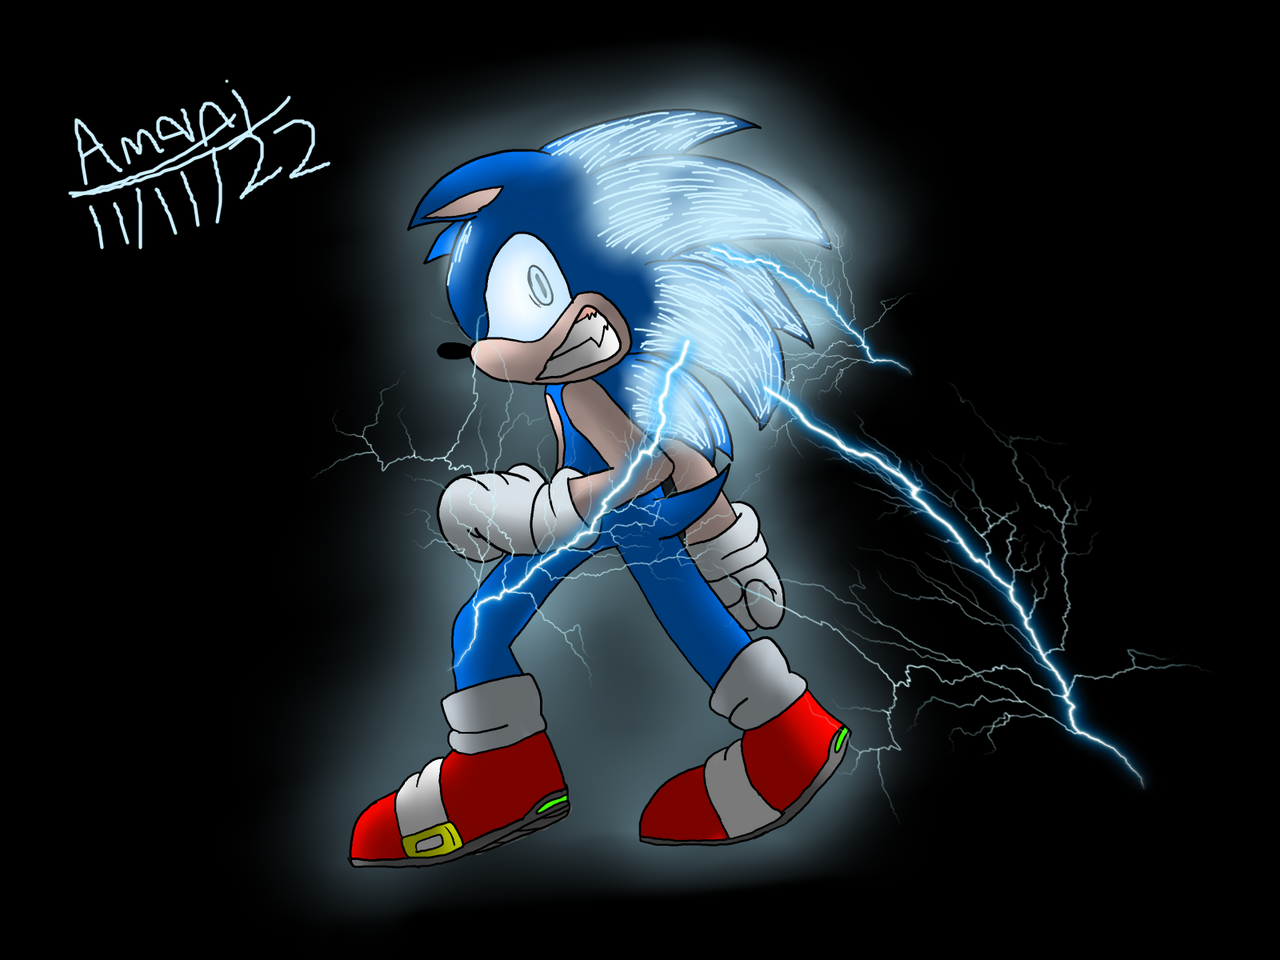 Sonic Dropped His Rings by Pixlbits on DeviantArt